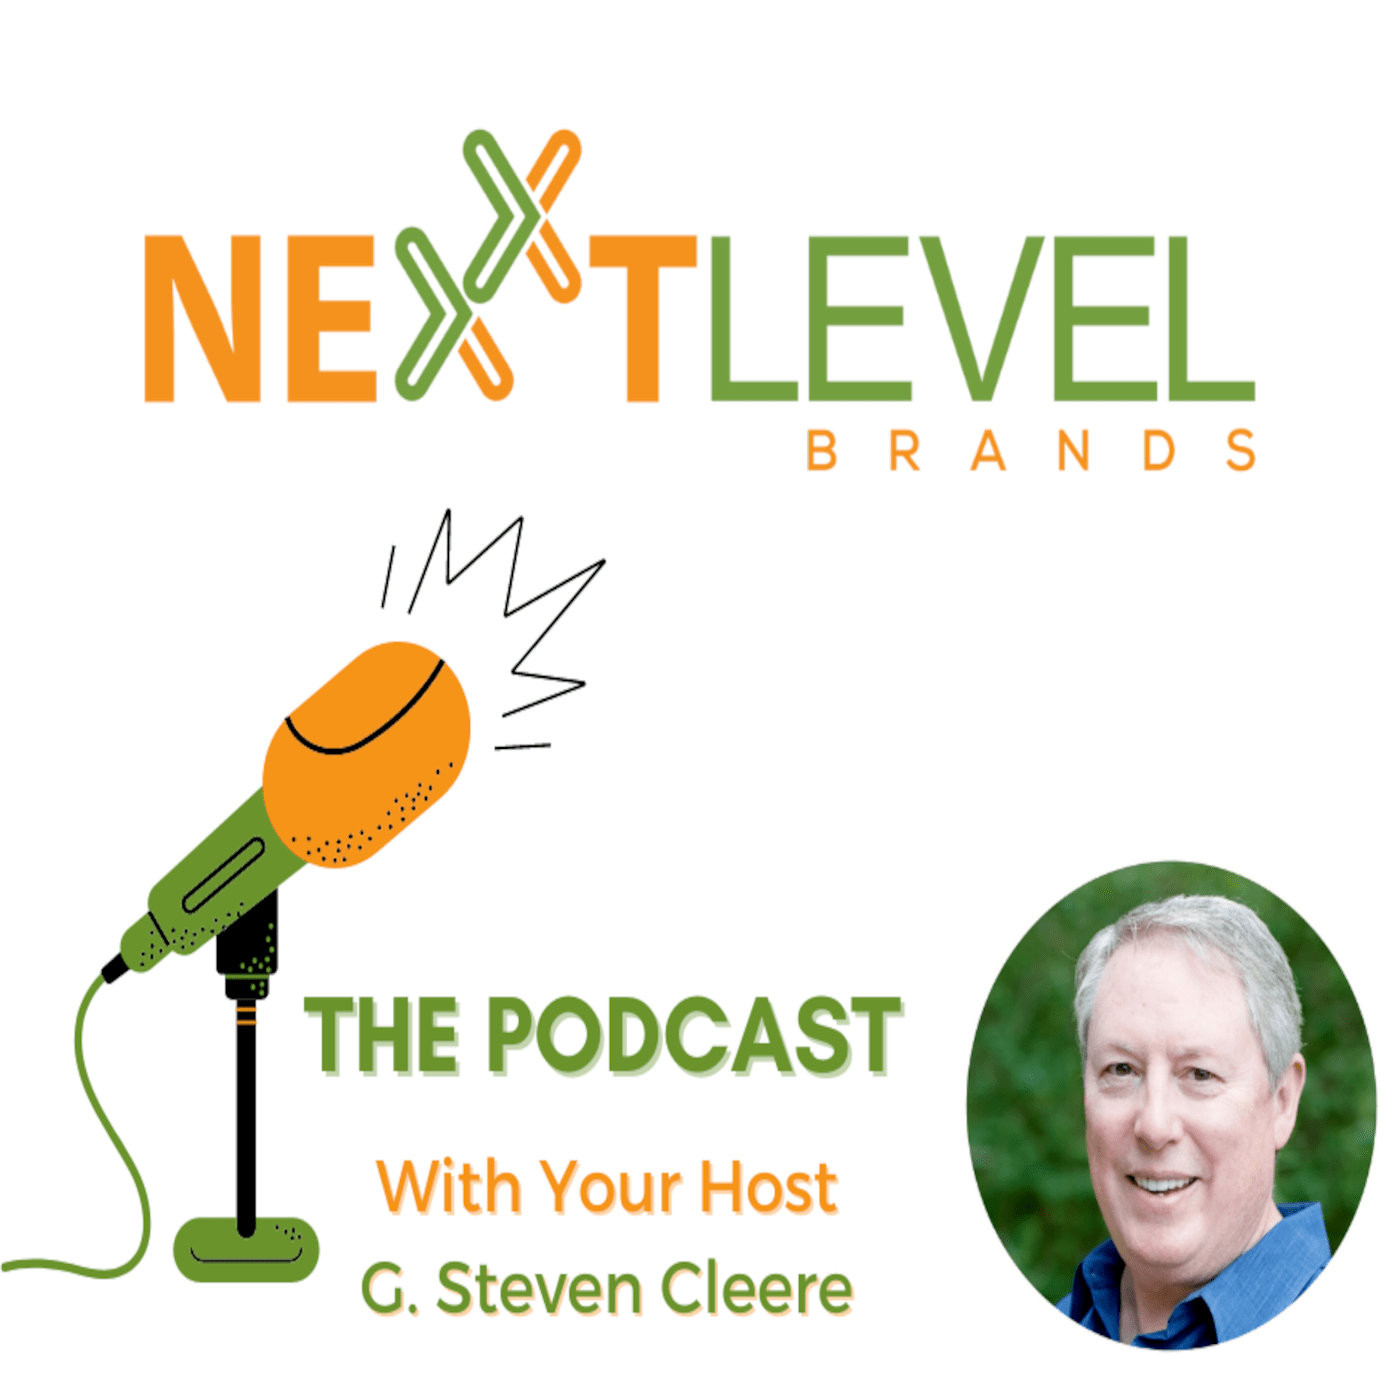 An (Un) Twisted Tale - The Pretzel Man on the NexxtLevel Brands Podcast!